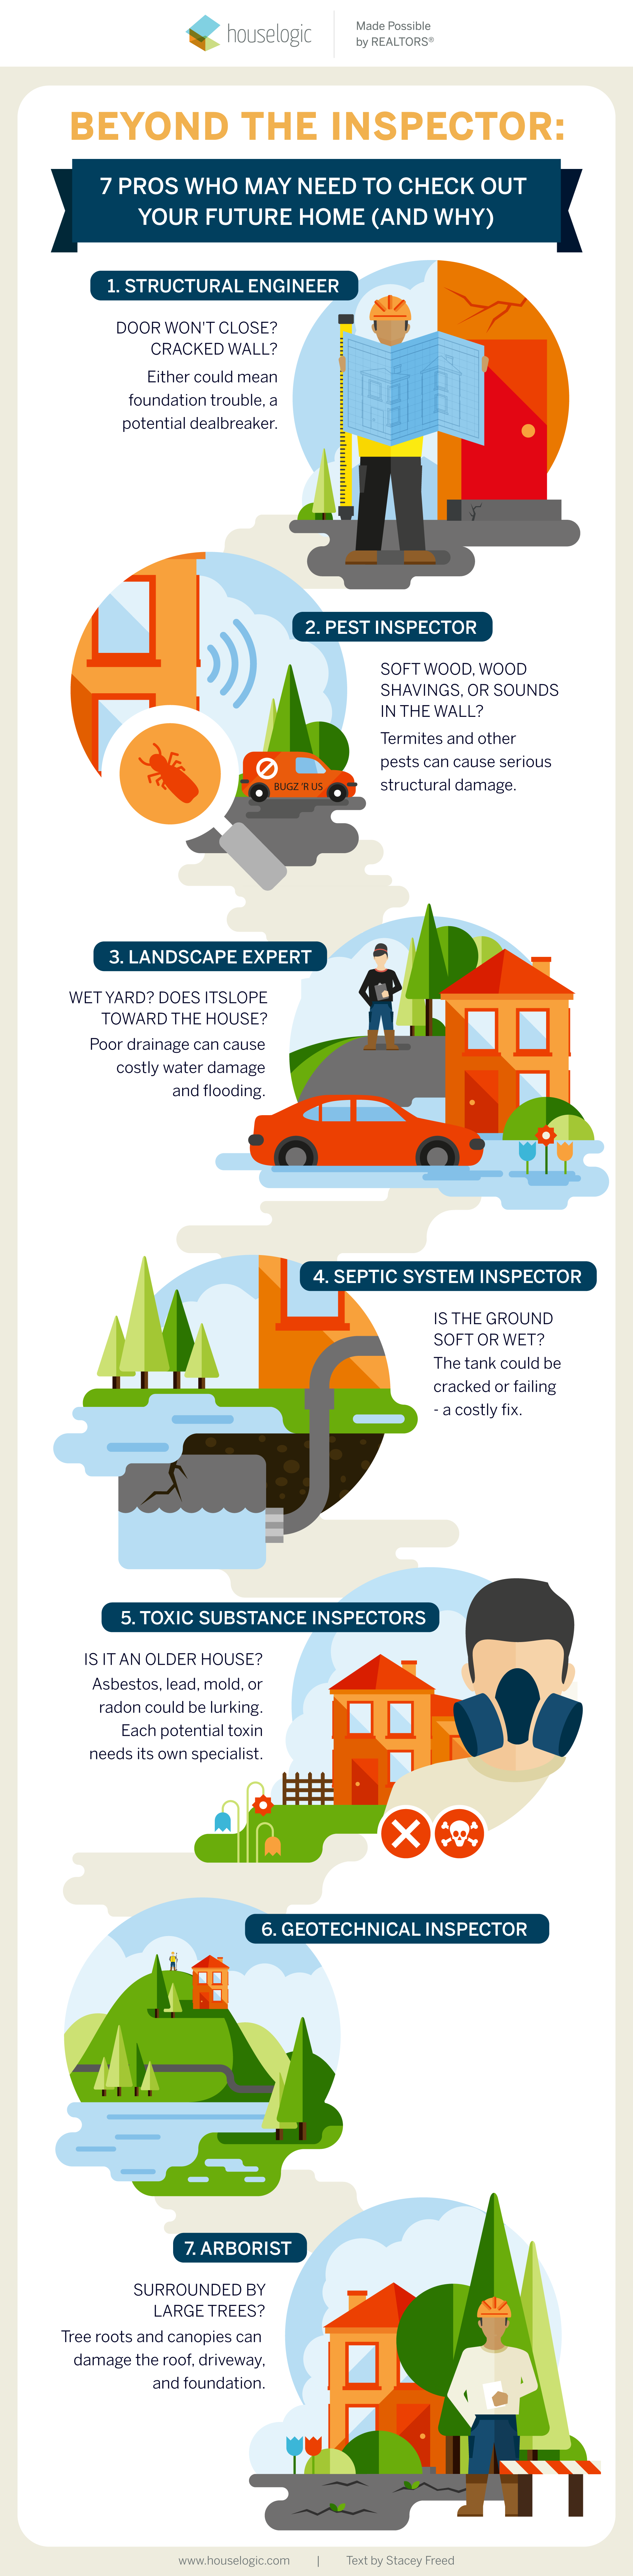 Home inspection checklist infographic